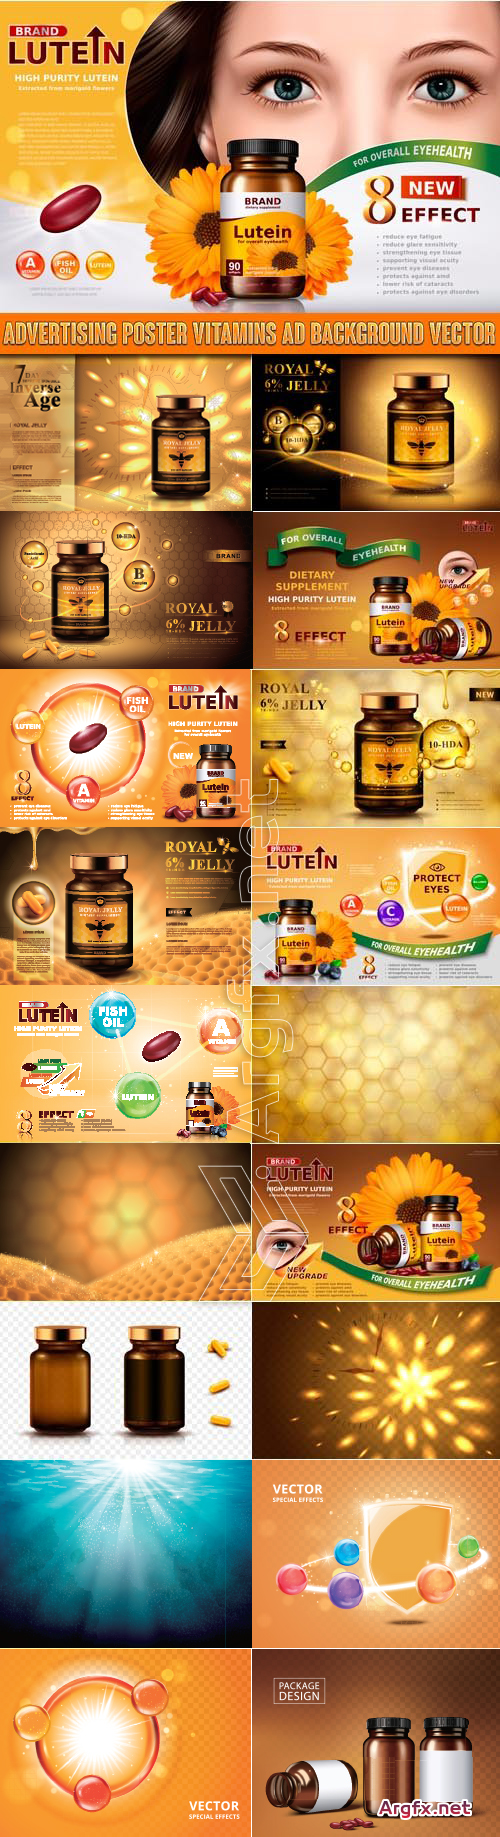  Advertising poster vitamins ad background vector